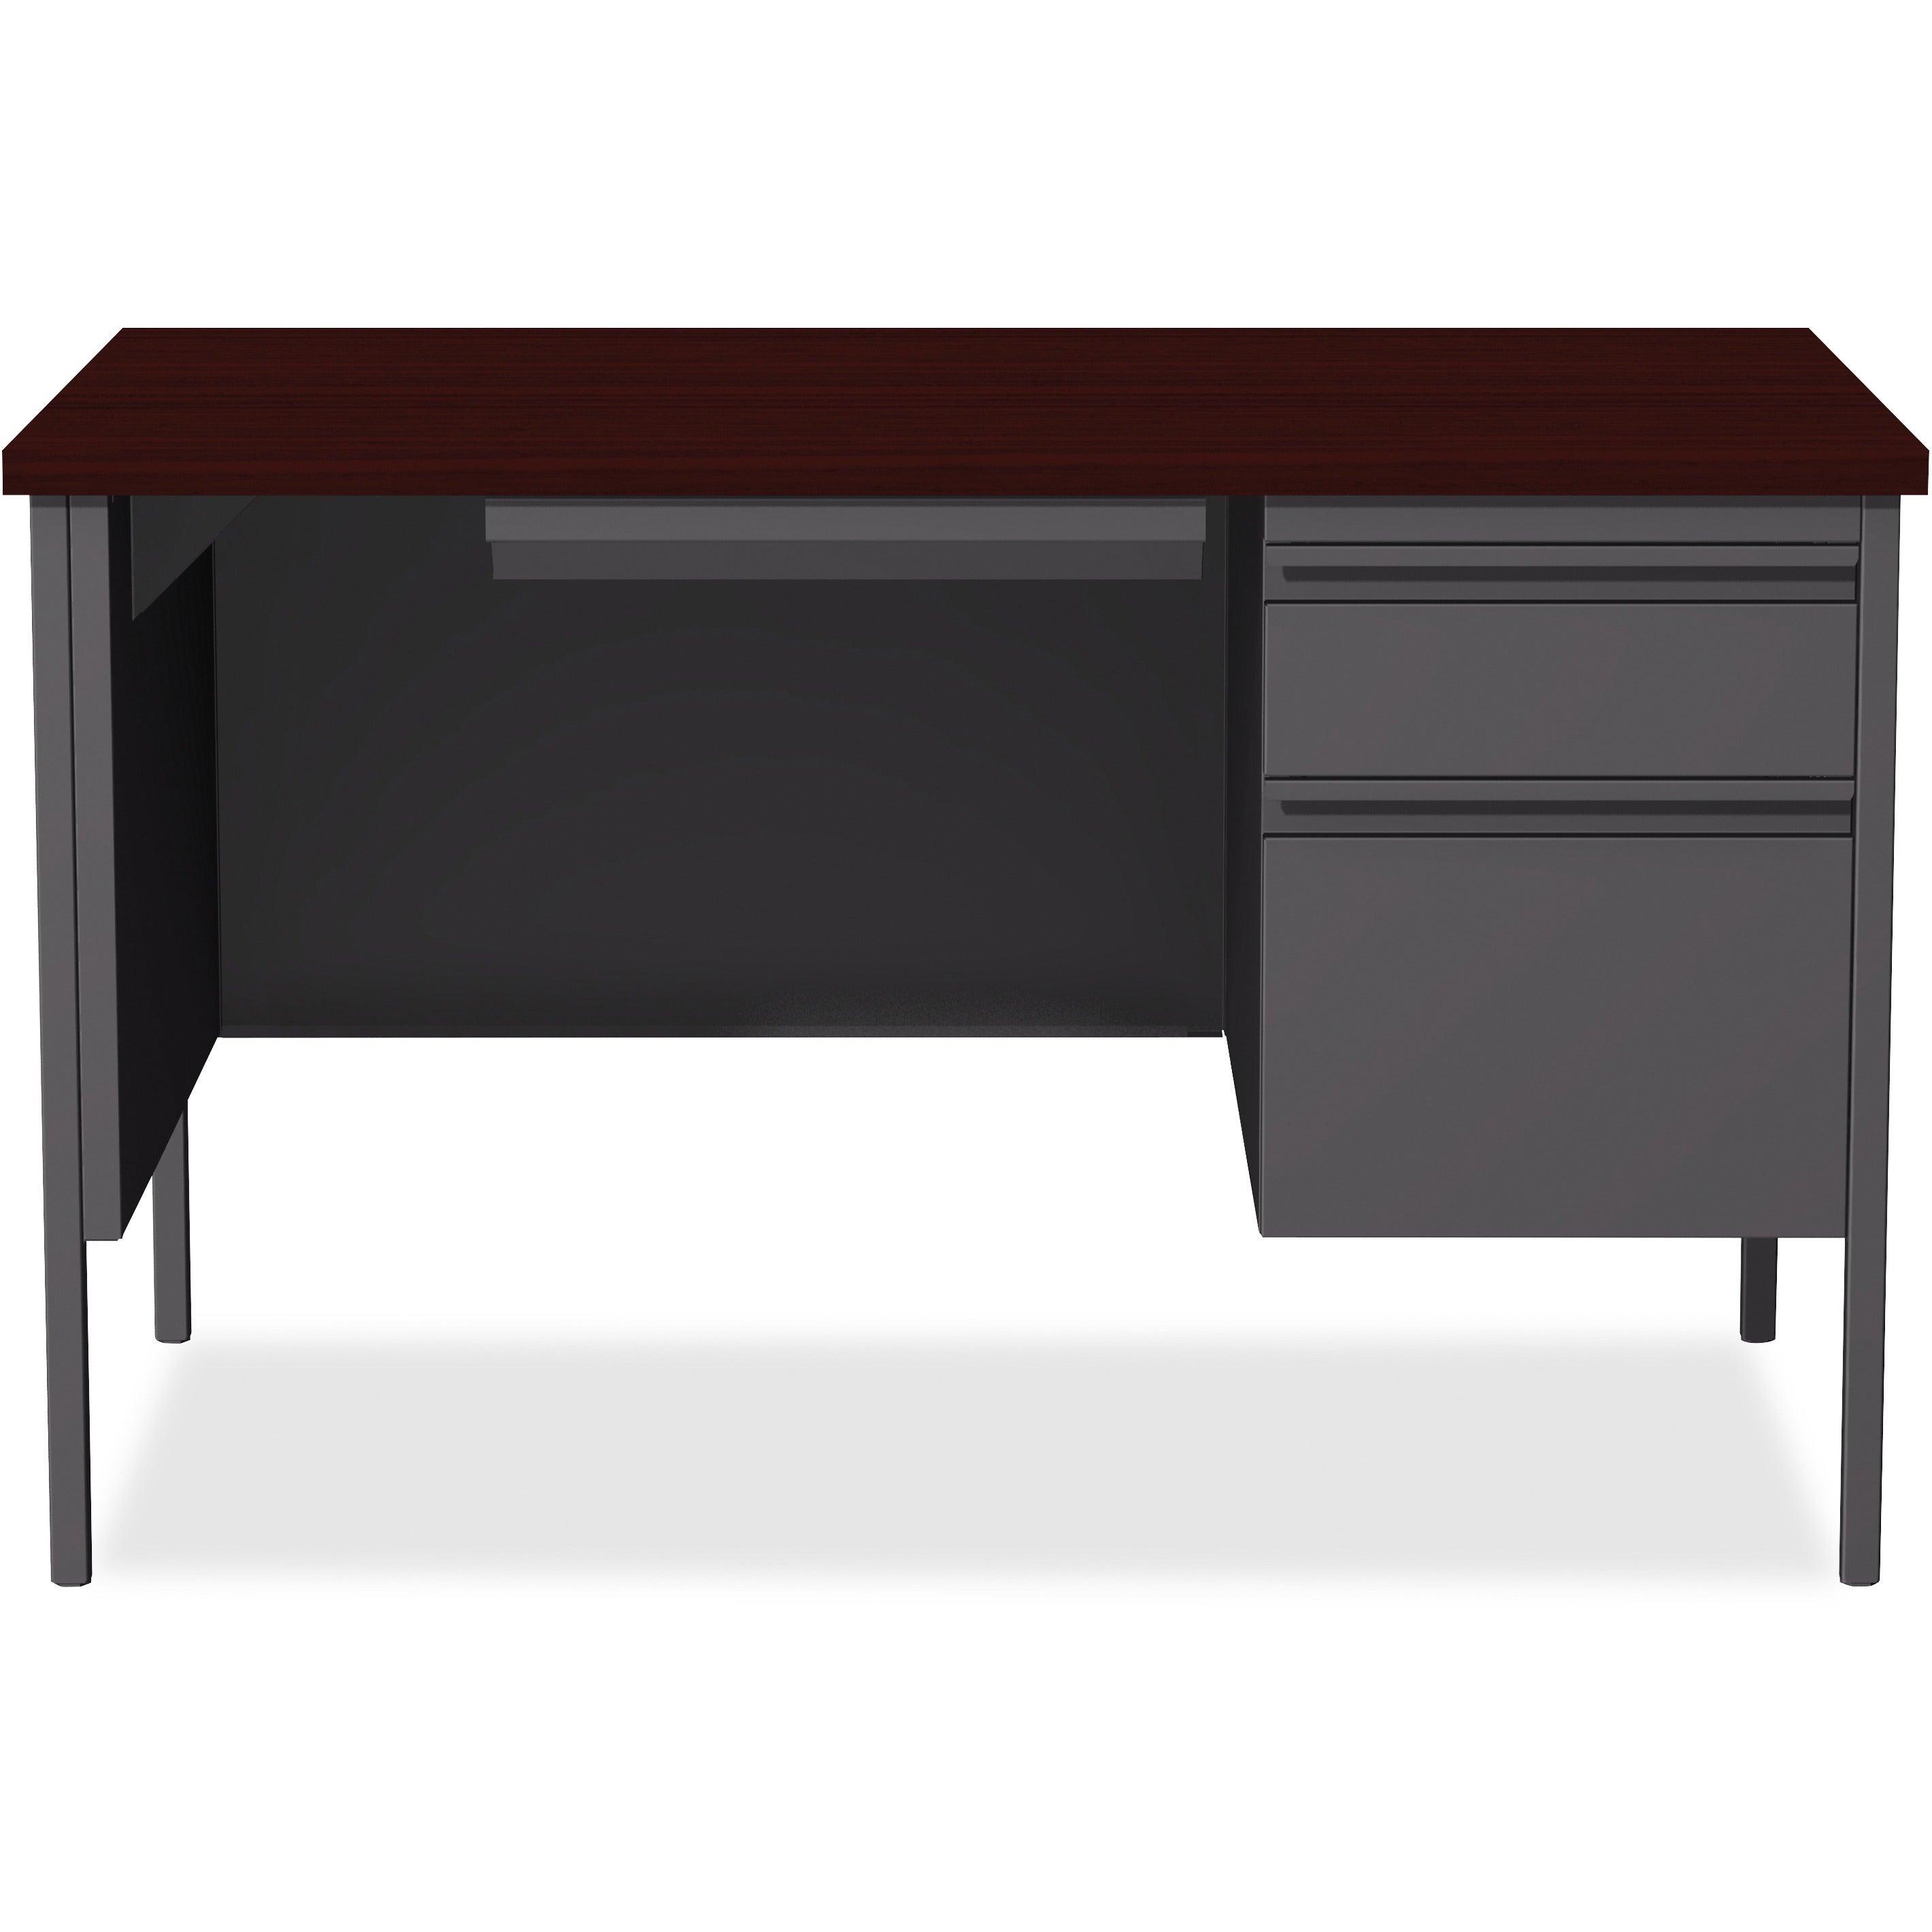 lorell-fortress-series-48-right-single-pedestal-desk-for-table-toplaminated-rectangle-mahogany-top-30-table-top-length-x-48-table-top-width-x-113-table-top-thickness-2950-height-assembly-required-mahogany-steel-1-each_llr66903 - 2